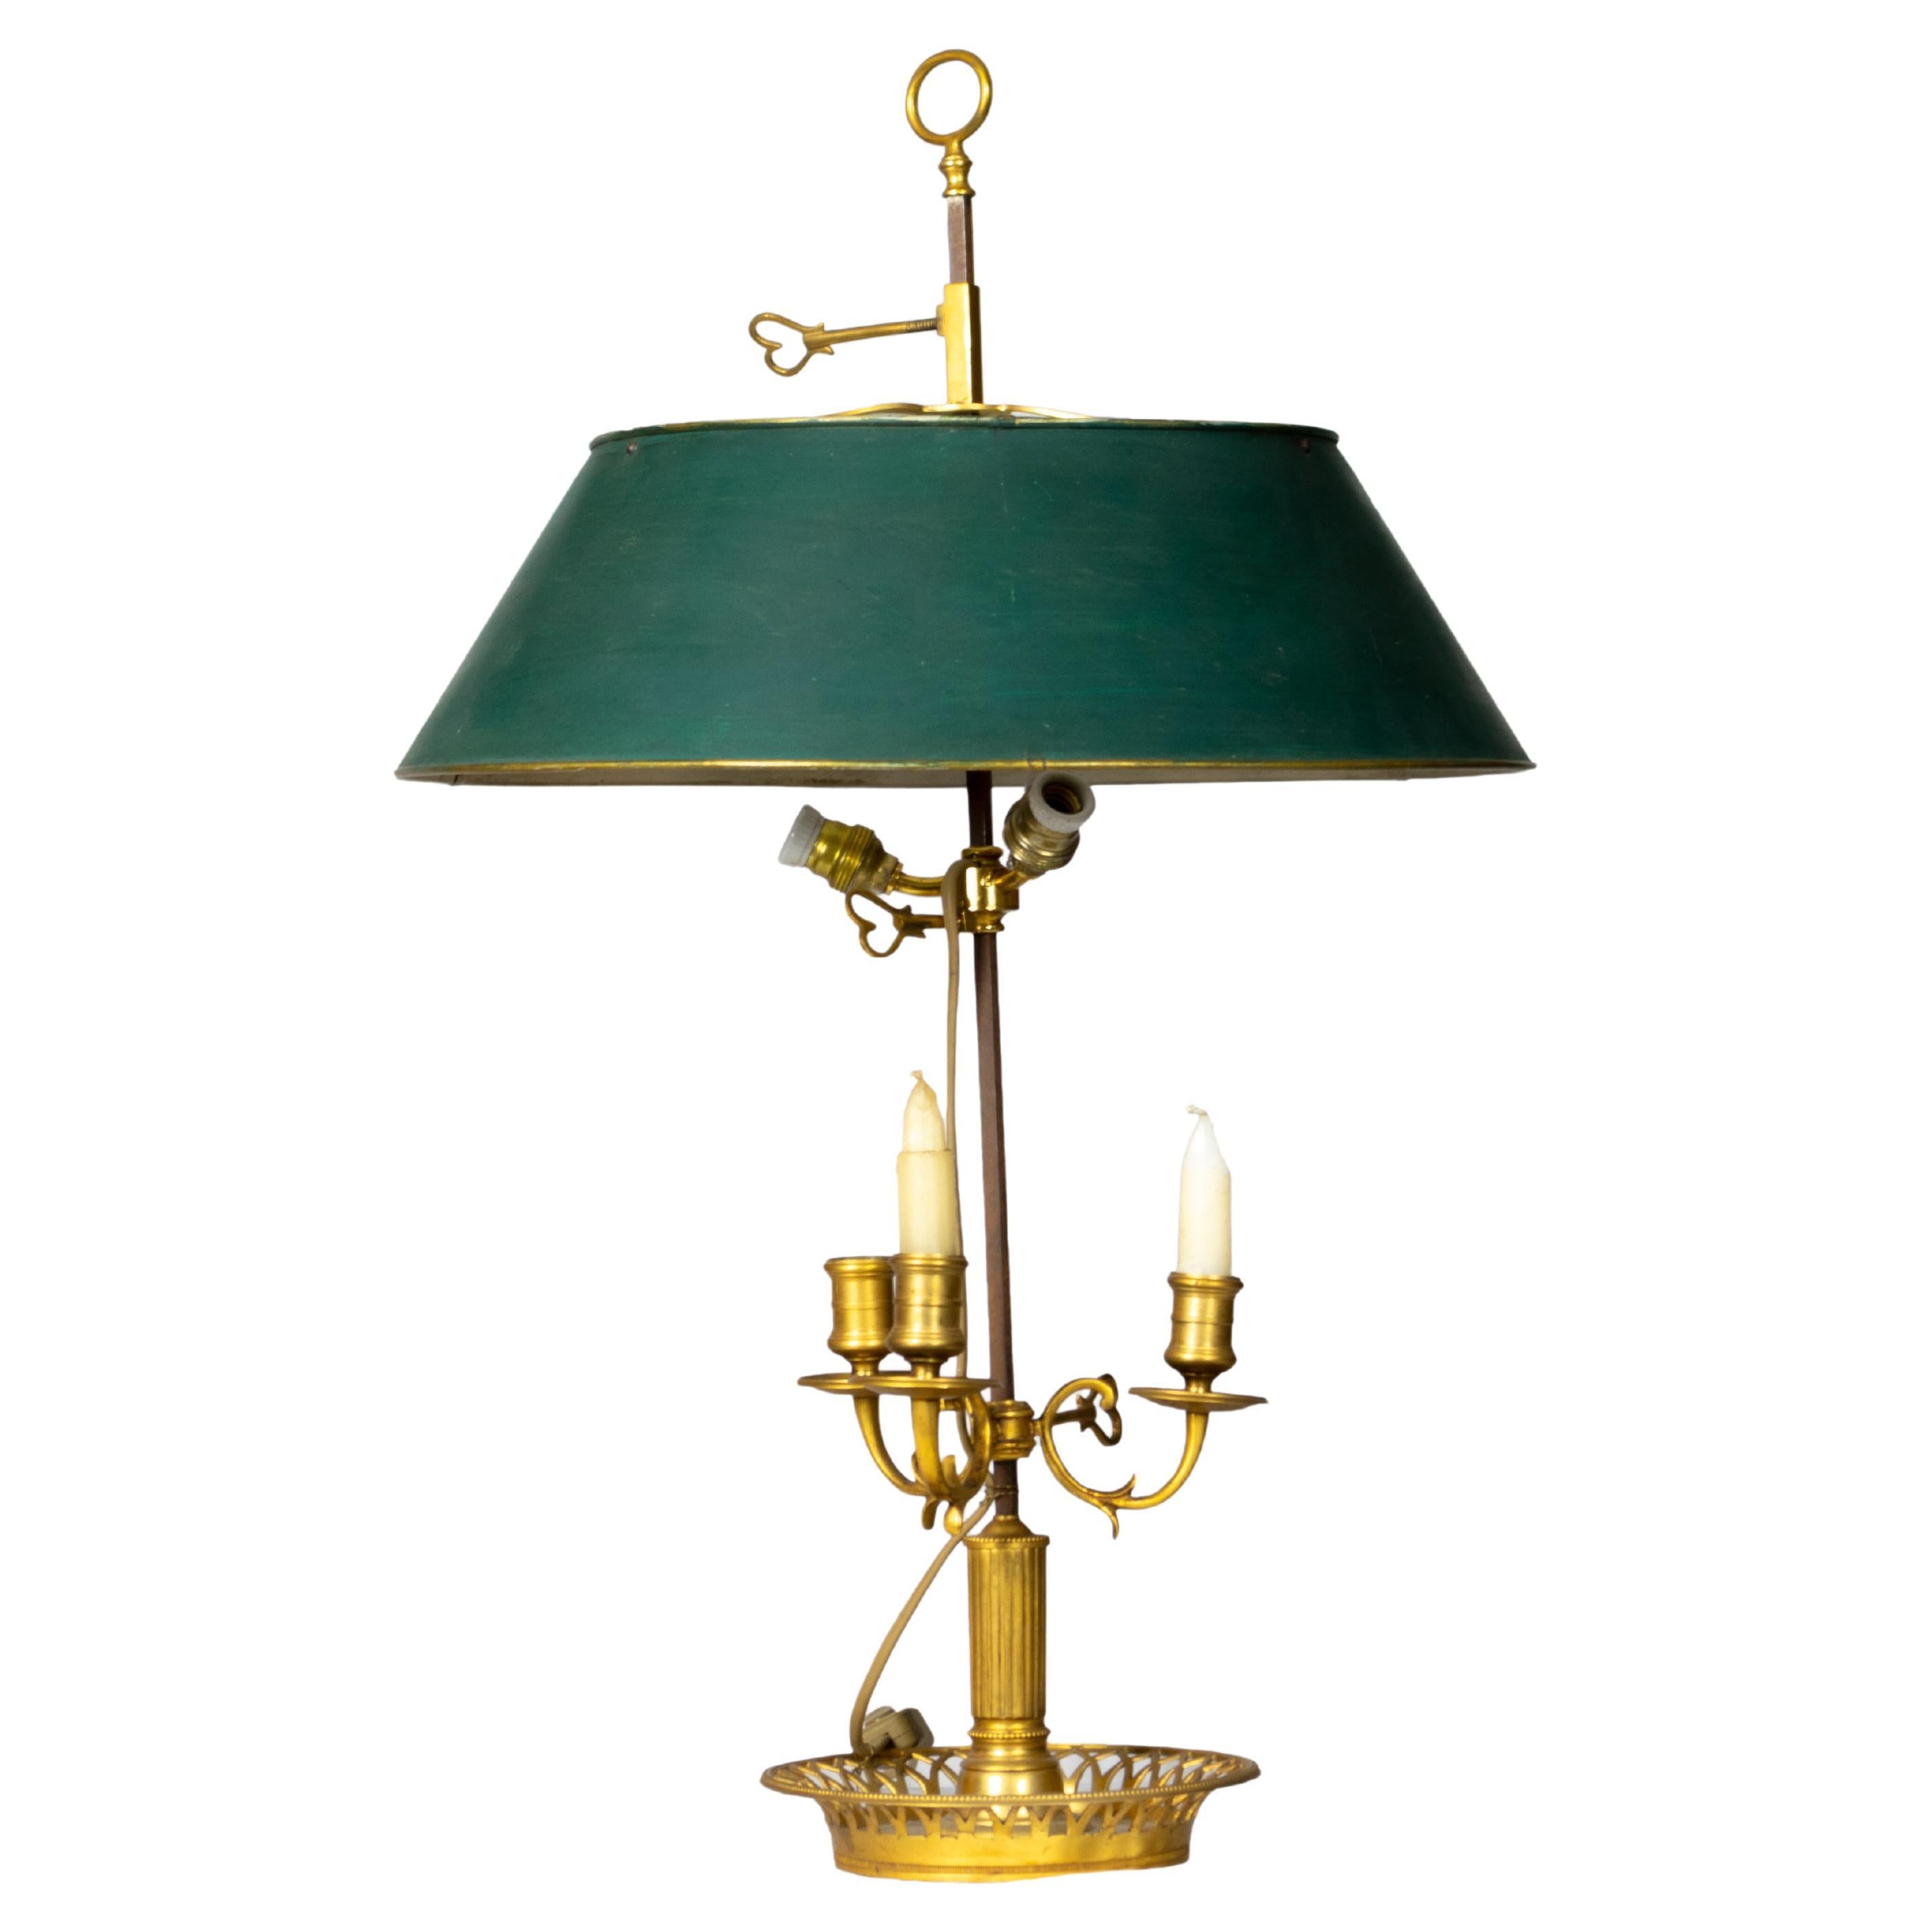 French Bouillotte Table Lamp Empire-style